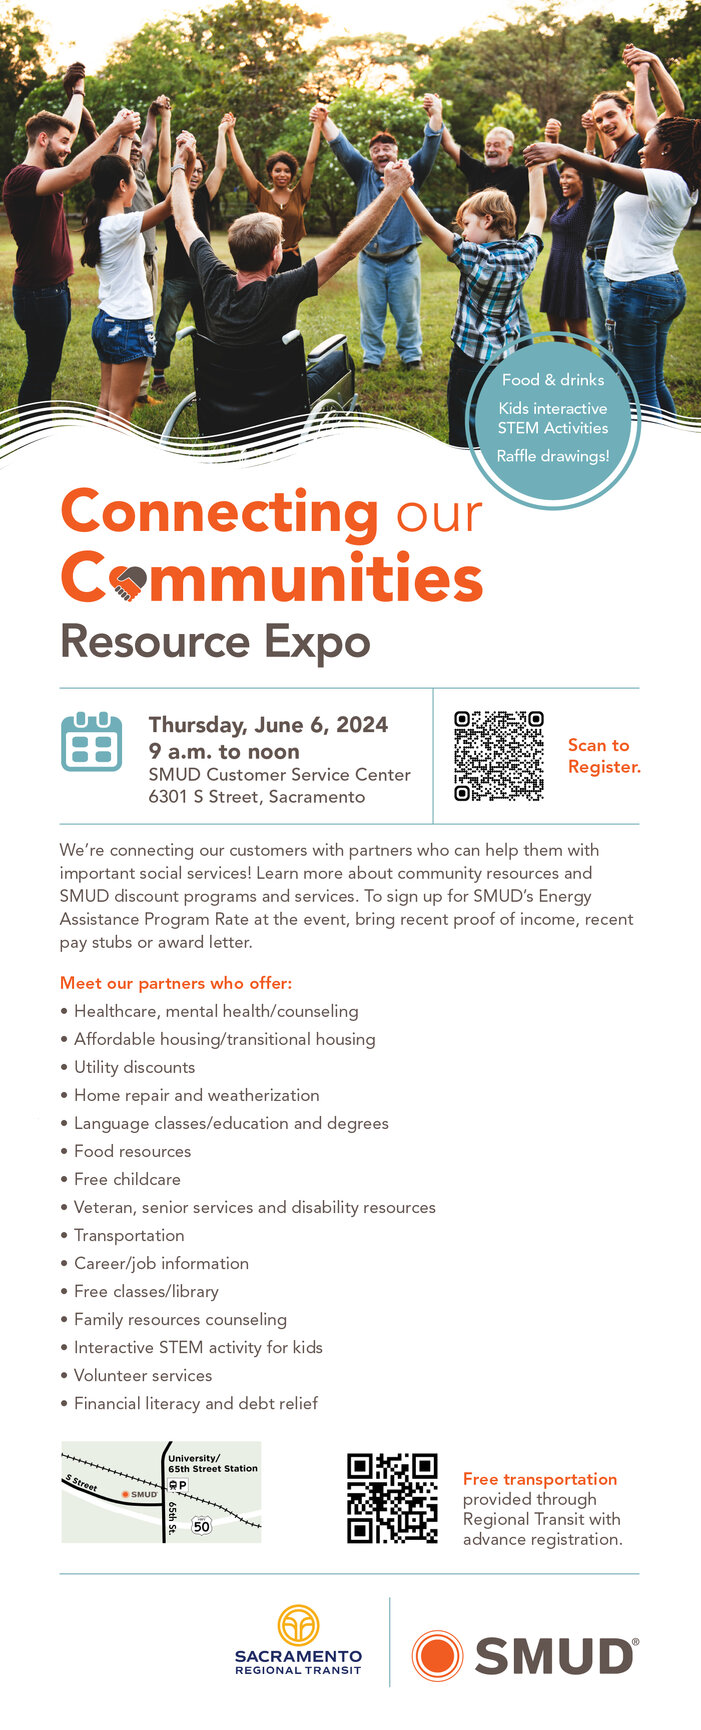 SMUD’s Connecting our Community Resource Expo